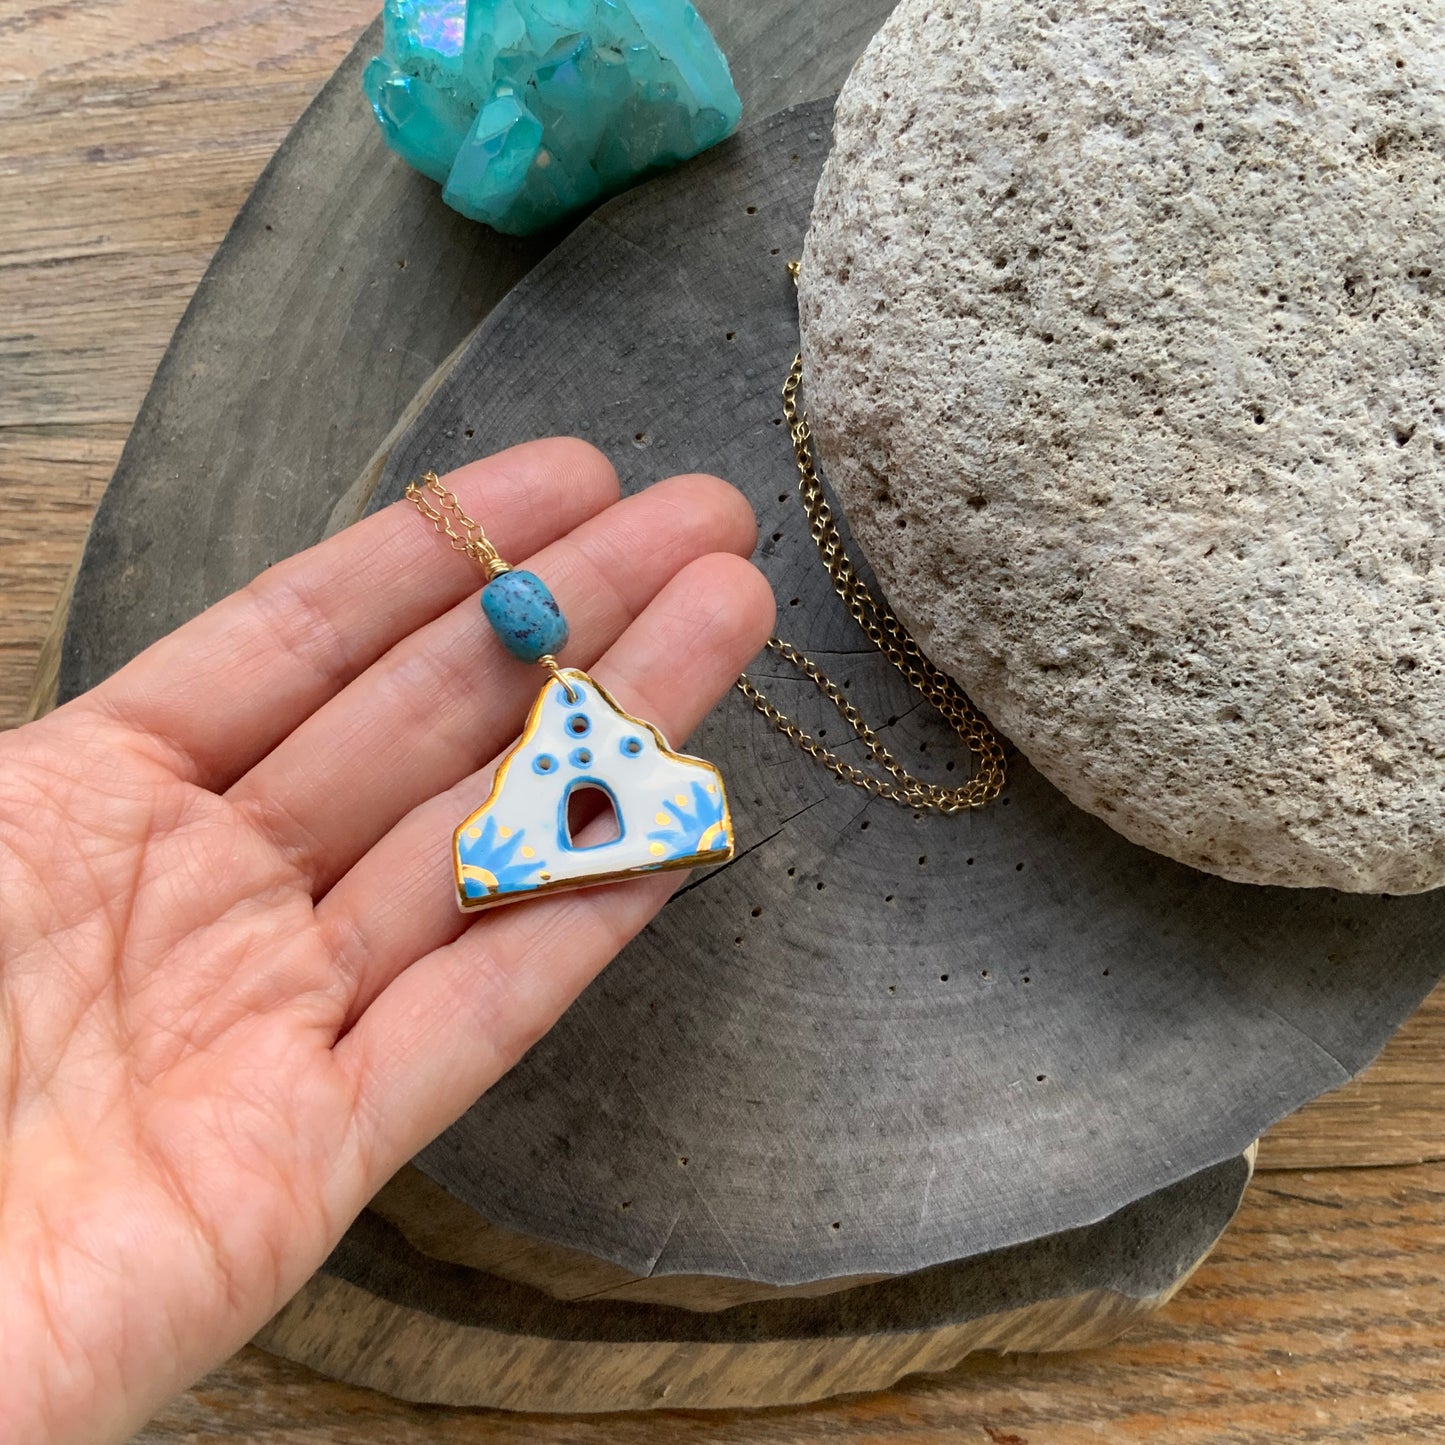 Little Blue Agave Adobe home and genuine turquoise charm necklace